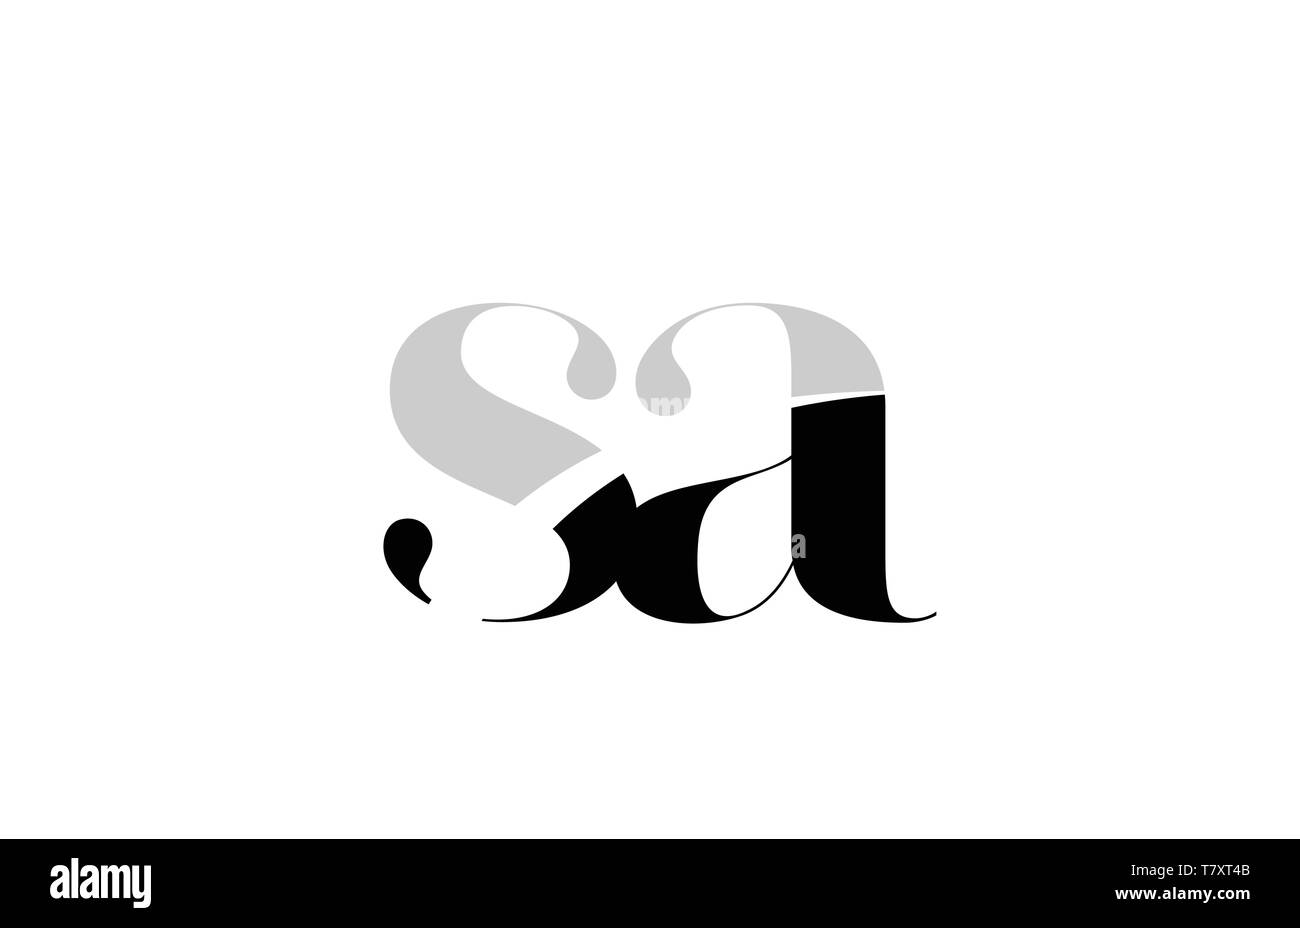 black and white alphabet letter sa s a logo icon design for a company or business Stock Vector